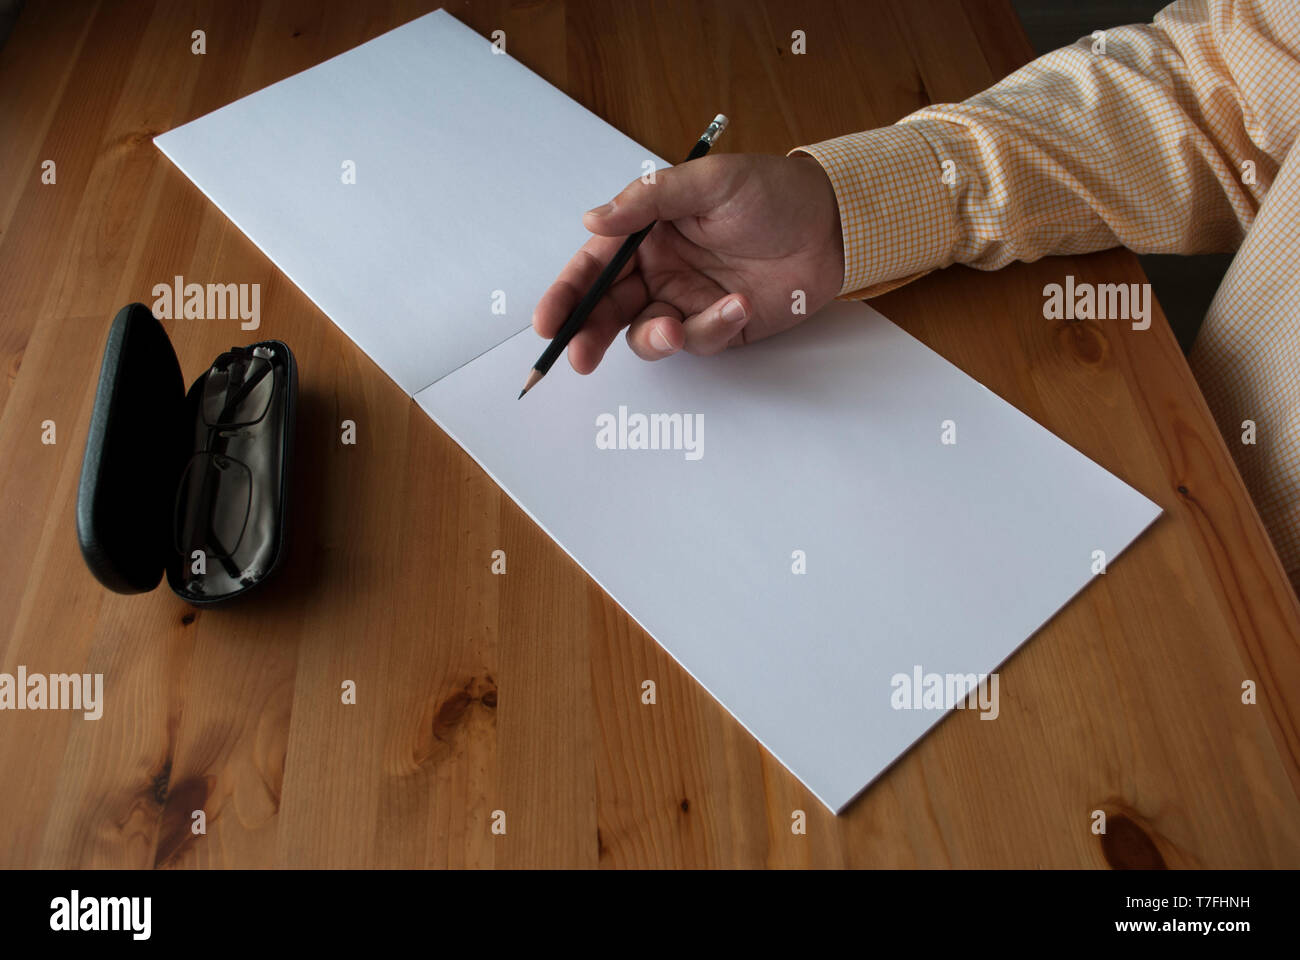 Man hand writing close up. Man searching for job openings. Scientist researching process concept. Exam preparation concept. Writer. Education idea Stock Photo